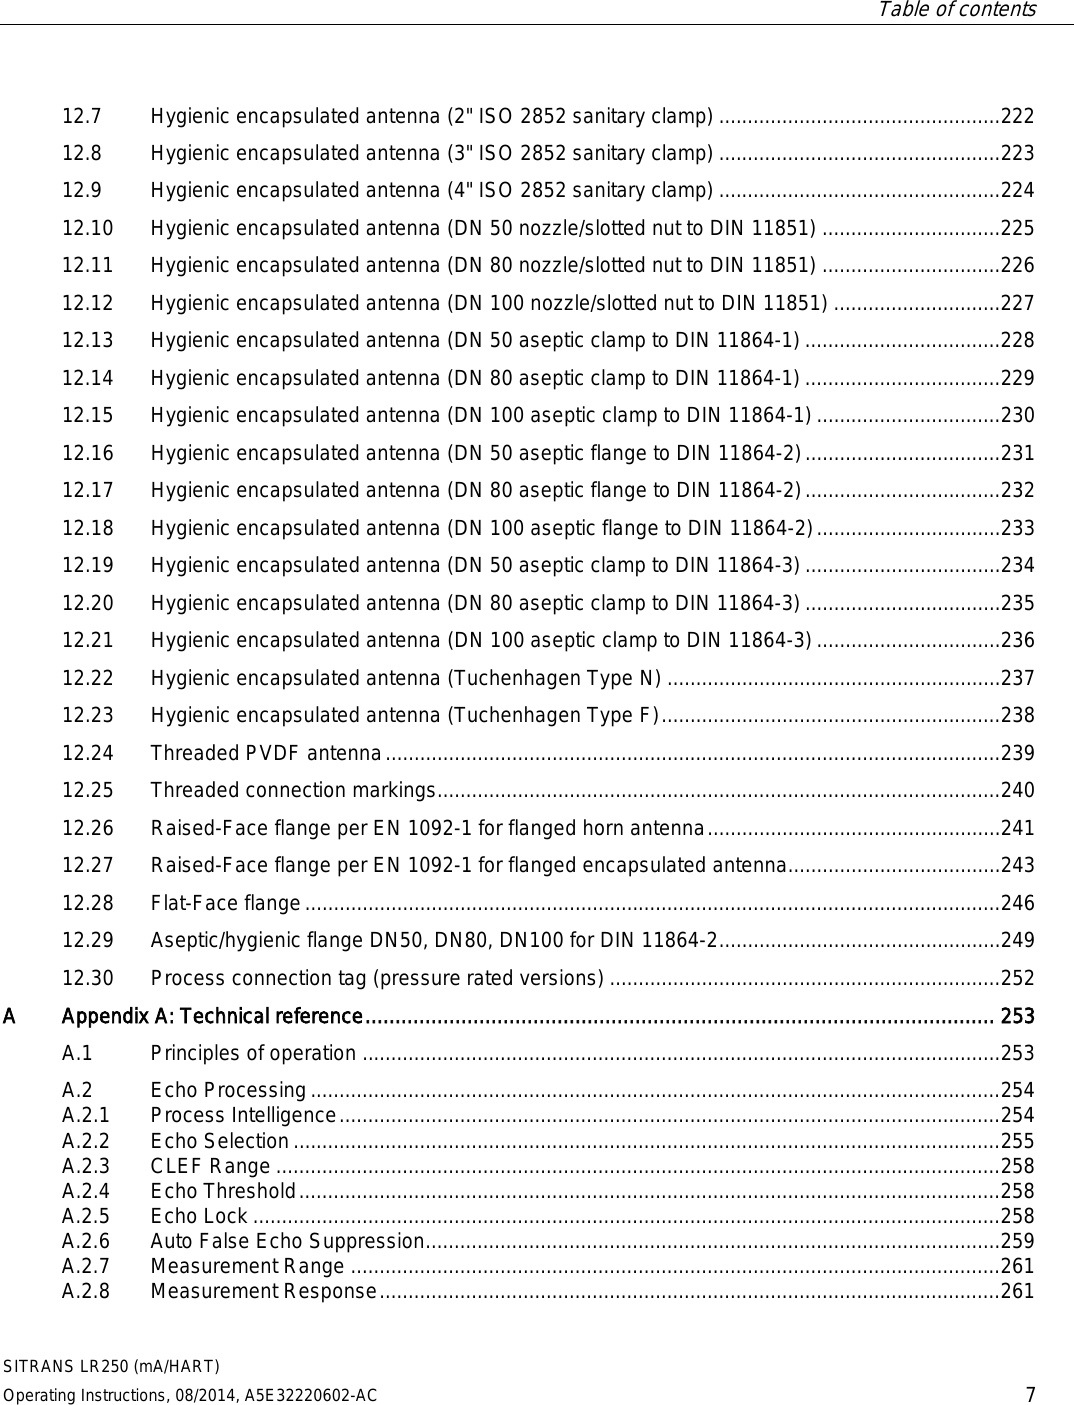  Table of contents   SITRANS LR250 (mA/HART) Operating Instructions, 08/2014, A5E32220602-AC 7 12.7 Hygienic encapsulated antenna (2&quot; ISO 2852 sanitary clamp) ................................................. 222 12.8 Hygienic encapsulated antenna (3&quot; ISO 2852 sanitary clamp) ................................................. 223 12.9 Hygienic encapsulated antenna (4&quot; ISO 2852 sanitary clamp) ................................................. 224 12.10 Hygienic encapsulated antenna (DN 50 nozzle/slotted nut to DIN 11851) ............................... 225 12.11 Hygienic encapsulated antenna (DN 80 nozzle/slotted nut to DIN 11851) ............................... 226 12.12 Hygienic encapsulated antenna (DN 100 nozzle/slotted nut to DIN 11851) ............................. 227 12.13 Hygienic encapsulated antenna (DN 50 aseptic clamp to DIN 11864-1) .................................. 228 12.14 Hygienic encapsulated antenna (DN 80 aseptic clamp to DIN 11864-1) .................................. 229 12.15 Hygienic encapsulated antenna (DN 100 aseptic clamp to DIN 11864-1) ................................ 230 12.16 Hygienic encapsulated antenna (DN 50 aseptic flange to DIN 11864-2) .................................. 231 12.17 Hygienic encapsulated antenna (DN 80 aseptic flange to DIN 11864-2) .................................. 232 12.18 Hygienic encapsulated antenna (DN 100 aseptic flange to DIN 11864-2) ................................ 233 12.19 Hygienic encapsulated antenna (DN 50 aseptic clamp to DIN 11864-3) .................................. 234 12.20 Hygienic encapsulated antenna (DN 80 aseptic clamp to DIN 11864-3) .................................. 235 12.21 Hygienic encapsulated antenna (DN 100 aseptic clamp to DIN 11864-3) ................................ 236 12.22 Hygienic encapsulated antenna (Tuchenhagen Type N) .......................................................... 237 12.23 Hygienic encapsulated antenna (Tuchenhagen Type F) ........................................................... 238 12.24 Threaded PVDF antenna ........................................................................................................... 239 12.25 Threaded connection markings .................................................................................................. 240 12.26 Raised-Face flange per EN 1092-1 for flanged horn antenna ................................................... 241 12.27 Raised-Face flange per EN 1092-1 for flanged encapsulated antenna..................................... 243 12.28 Flat-Face flange ......................................................................................................................... 246 12.29 Aseptic/hygienic flange DN50, DN80, DN100 for DIN 11864-2 ................................................. 249 12.30 Process connection tag (pressure rated versions) .................................................................... 252 A  Appendix A: Technical reference ......................................................................................................... 253 A.1 Principles of operation ............................................................................................................... 253 A.2 Echo Processing ........................................................................................................................ 254 A.2.1  Process Intelligence ................................................................................................................... 254 A.2.2 Echo Selection ........................................................................................................................... 255 A.2.3 CLEF Range .............................................................................................................................. 258 A.2.4 Echo Threshold .......................................................................................................................... 258 A.2.5 Echo Lock .................................................................................................................................. 258 A.2.6 Auto False Echo Suppression .................................................................................................... 259 A.2.7 Measurement Range ................................................................................................................. 261 A.2.8 Measurement Response ............................................................................................................ 261 